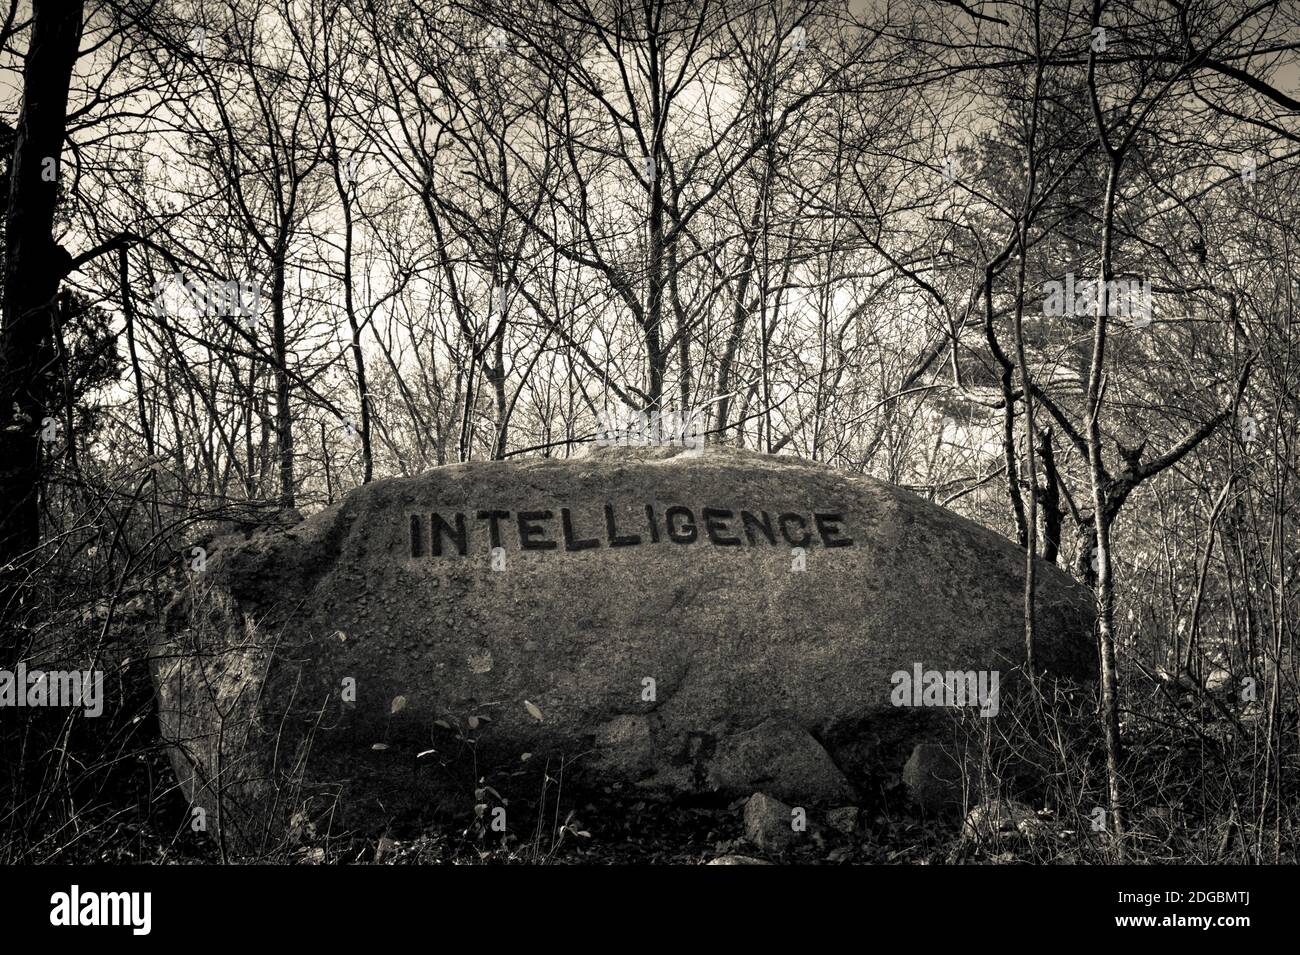 Dogtown rock with inspirational word 'Intelligence', Gloucester, Cape Ann, Essex County, Massachusetts, USA Stock Photo